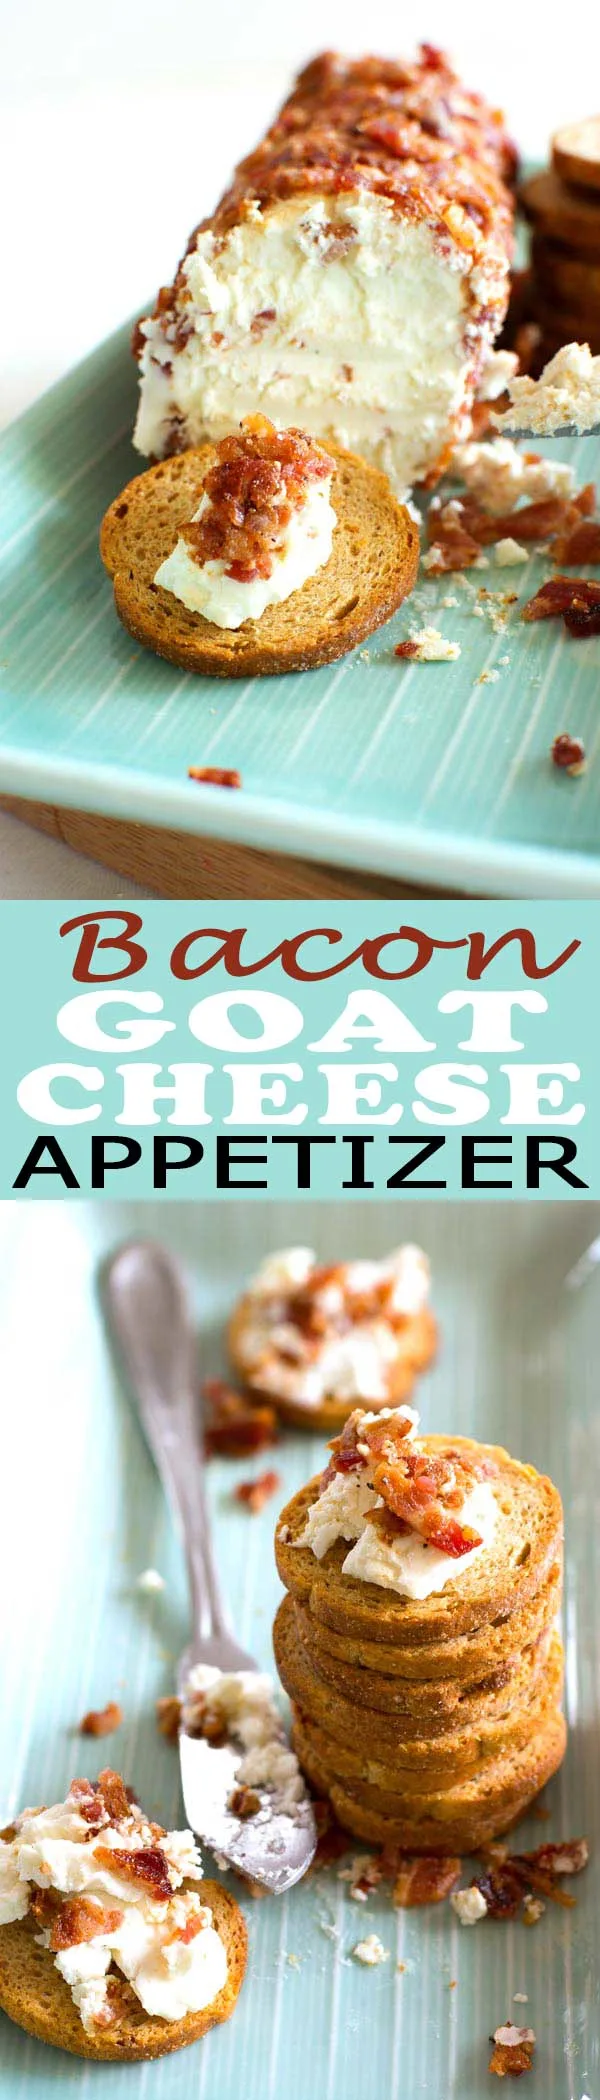 Creamy Bacon Goat Cheese Log: this easy appetizer has only two ingredients and tastes incredible!  #appetizer #easter #food #foodgasm #foodgawker #bacon #cheese #recipe #recipeoftheday #baconday #recipeideas